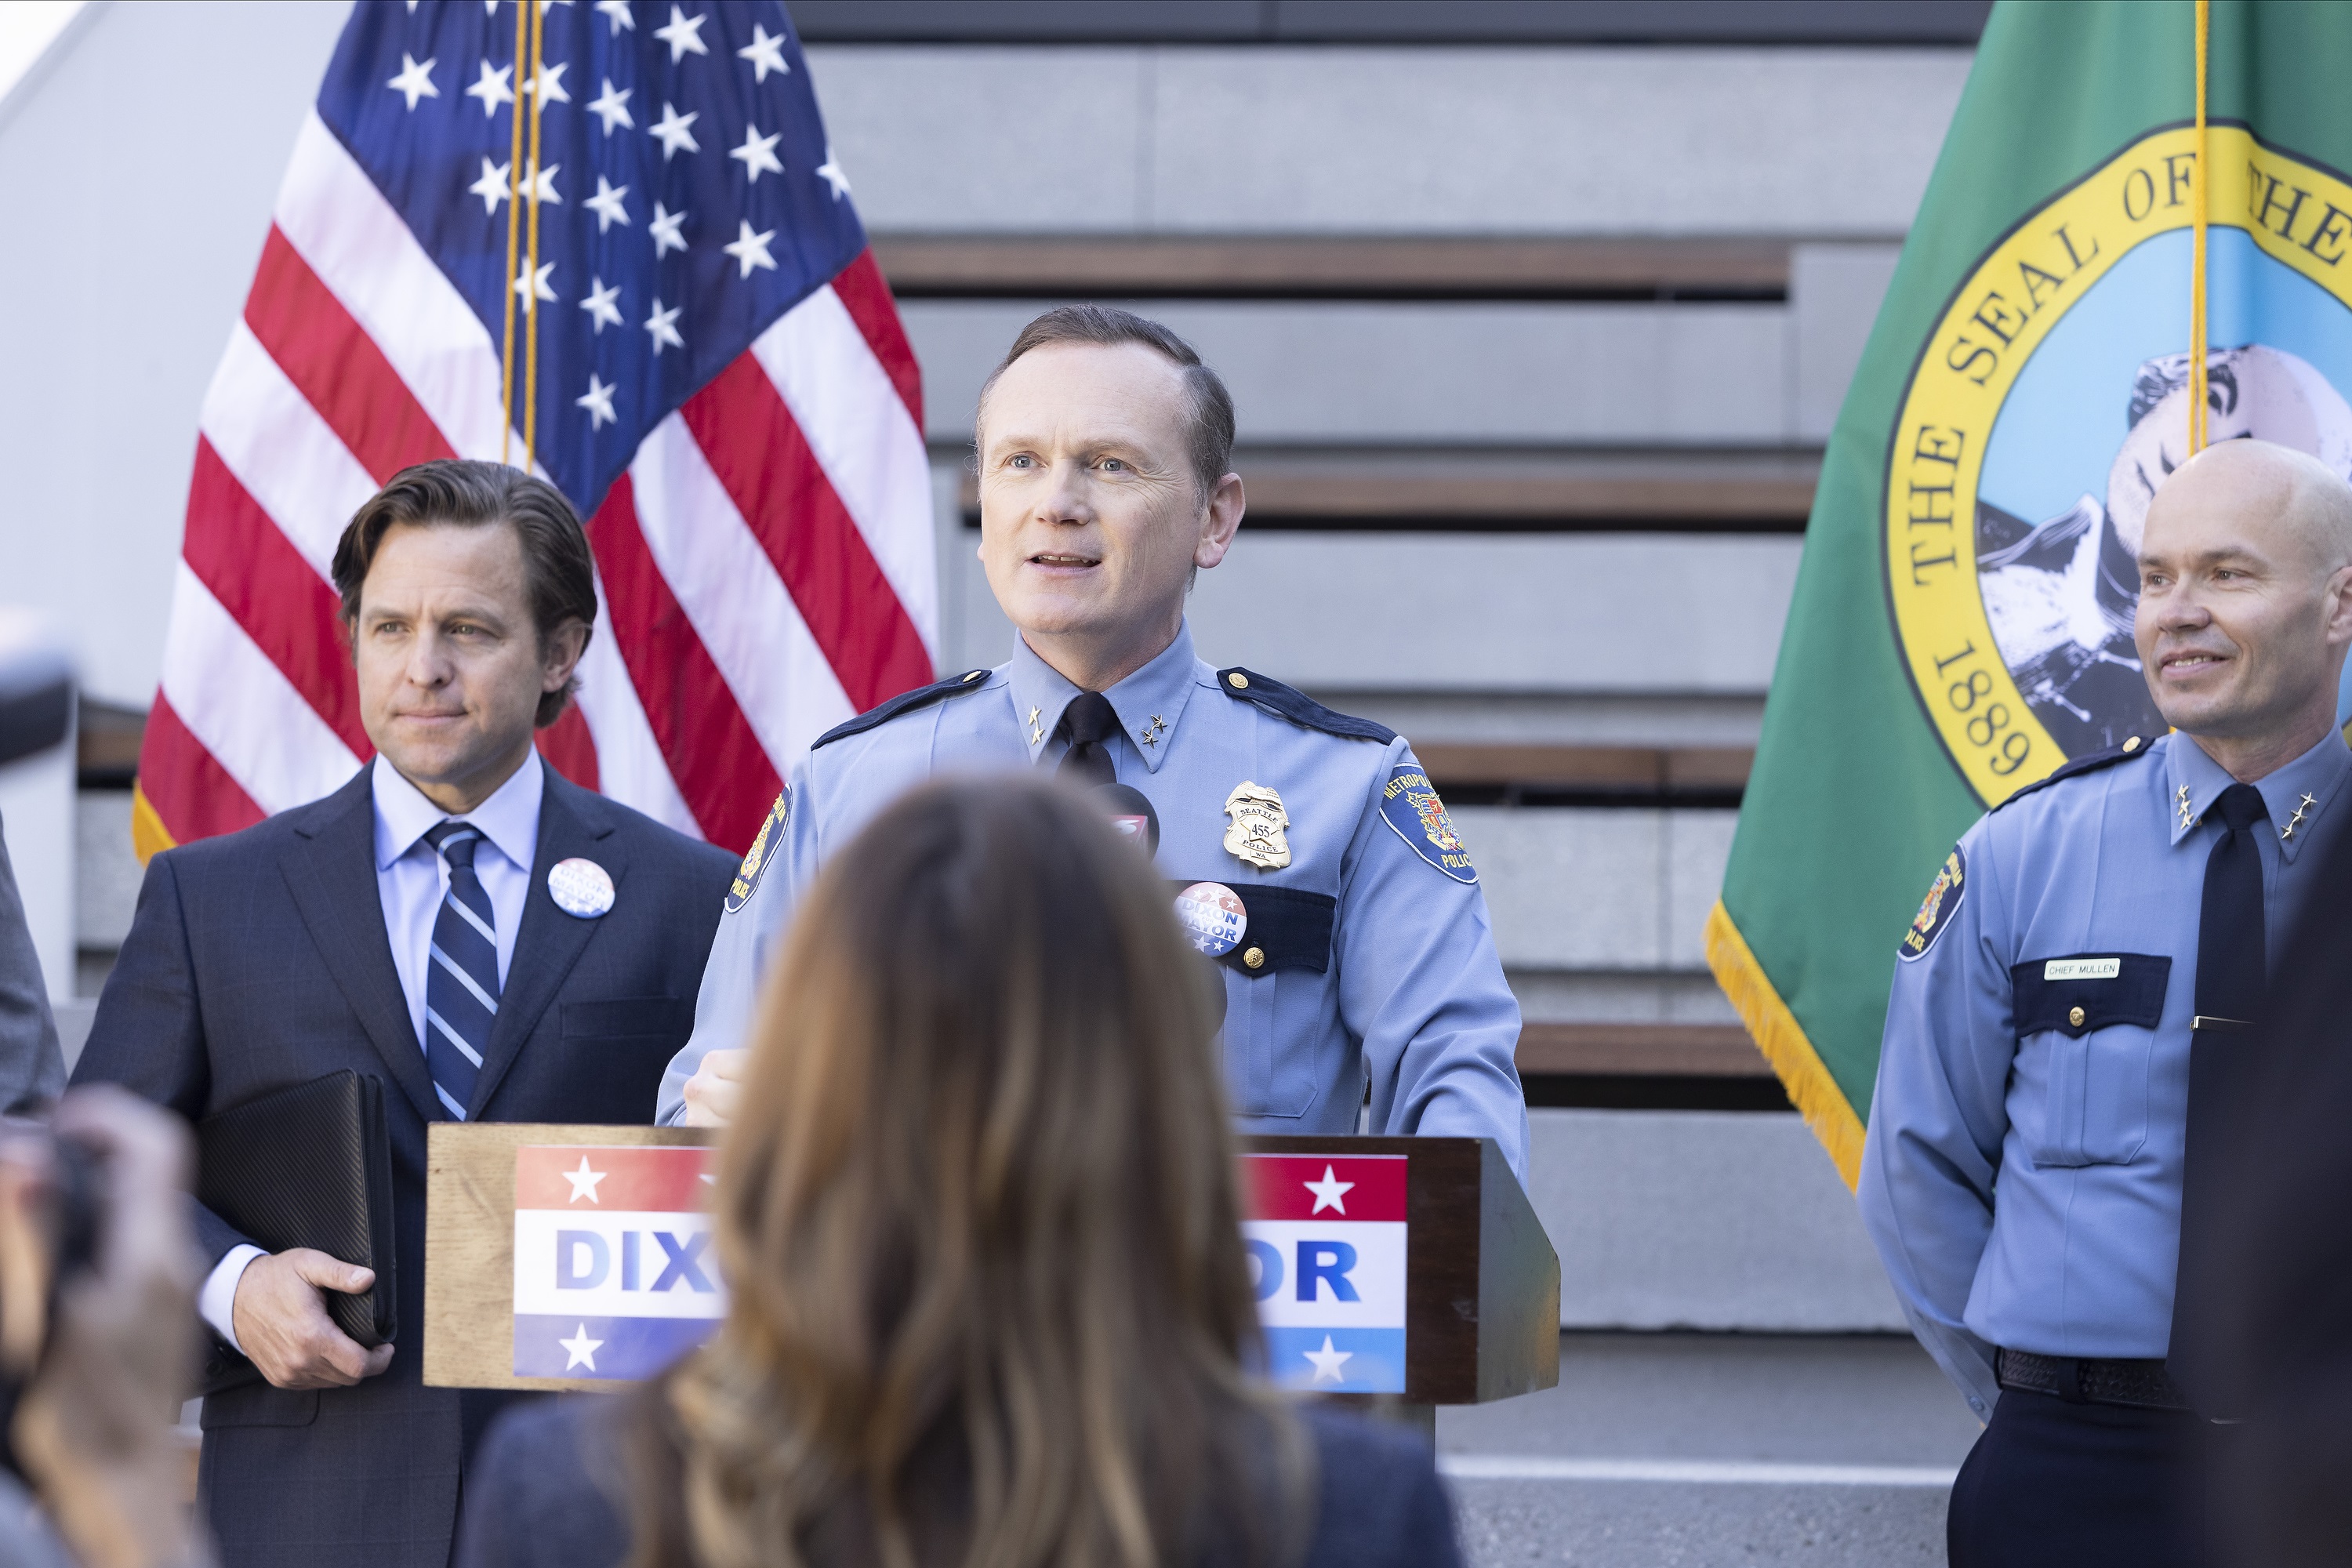 Pat Healy plays Michael Dixon standing at a podium in 'Station 19' Season 5 Episode 16